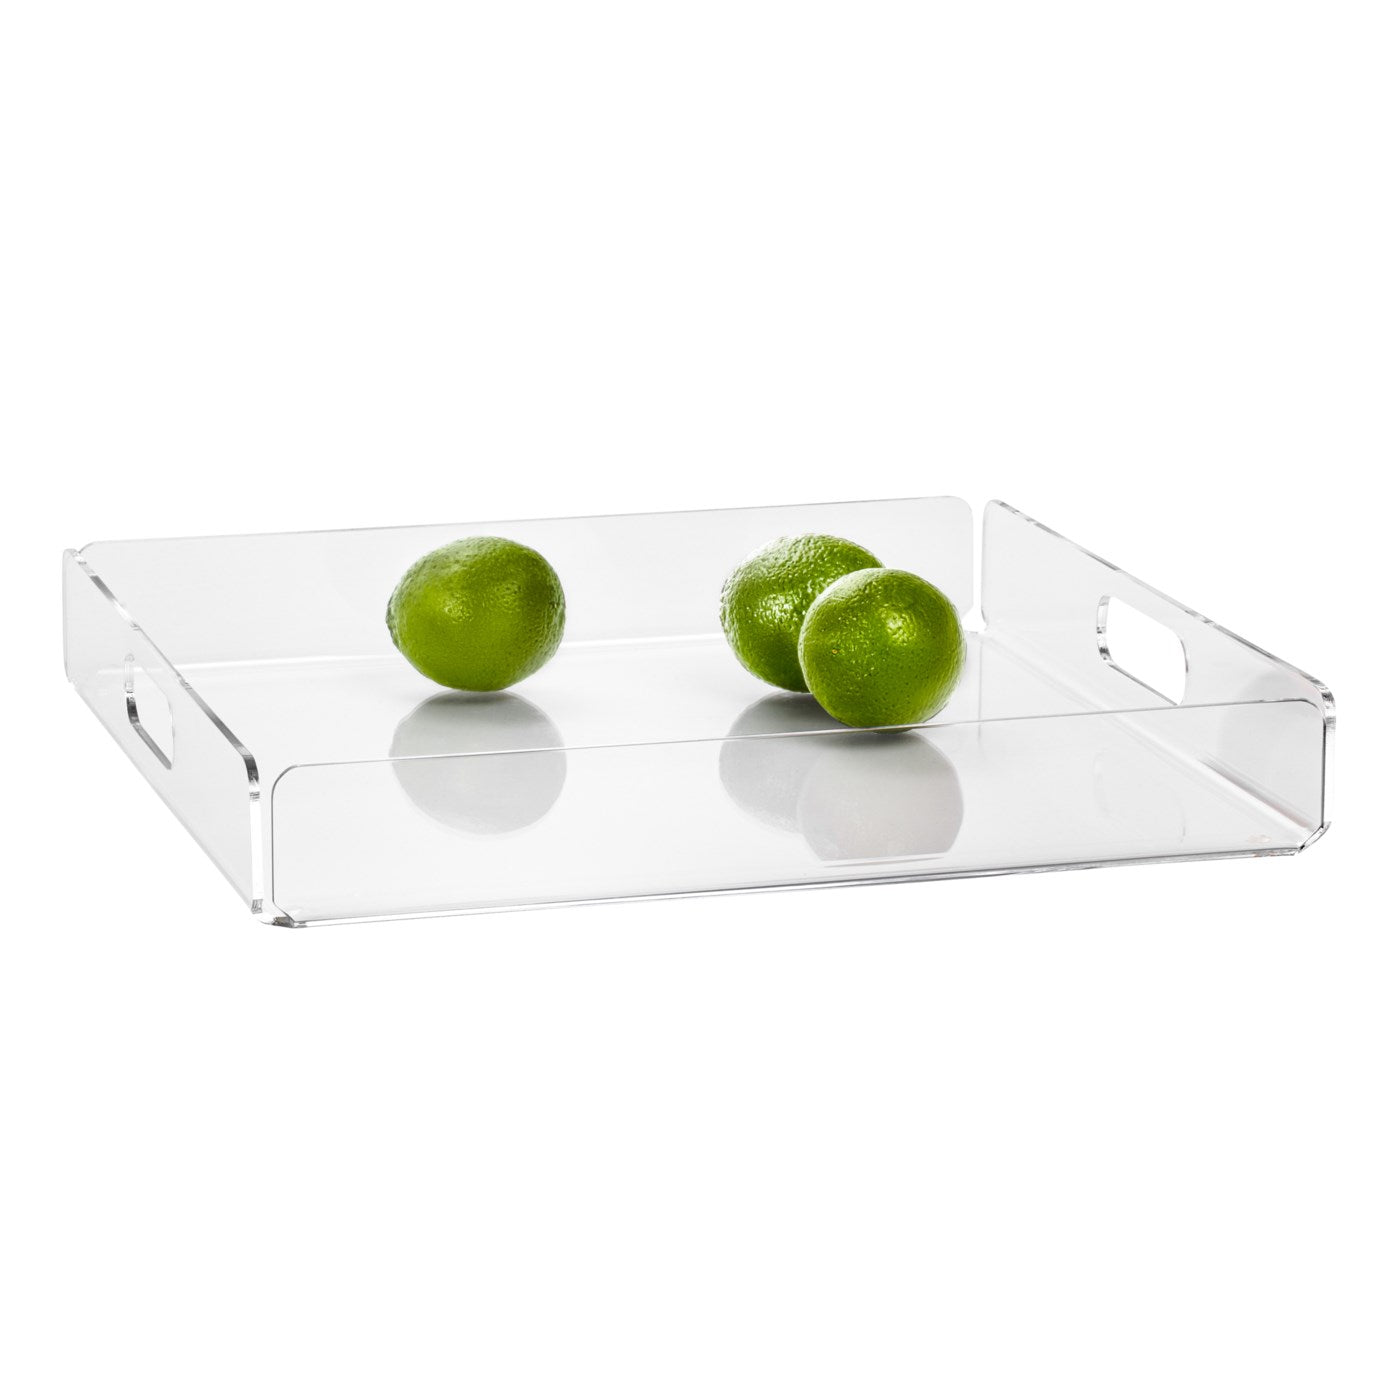 Lucite Acrylic Square Tray